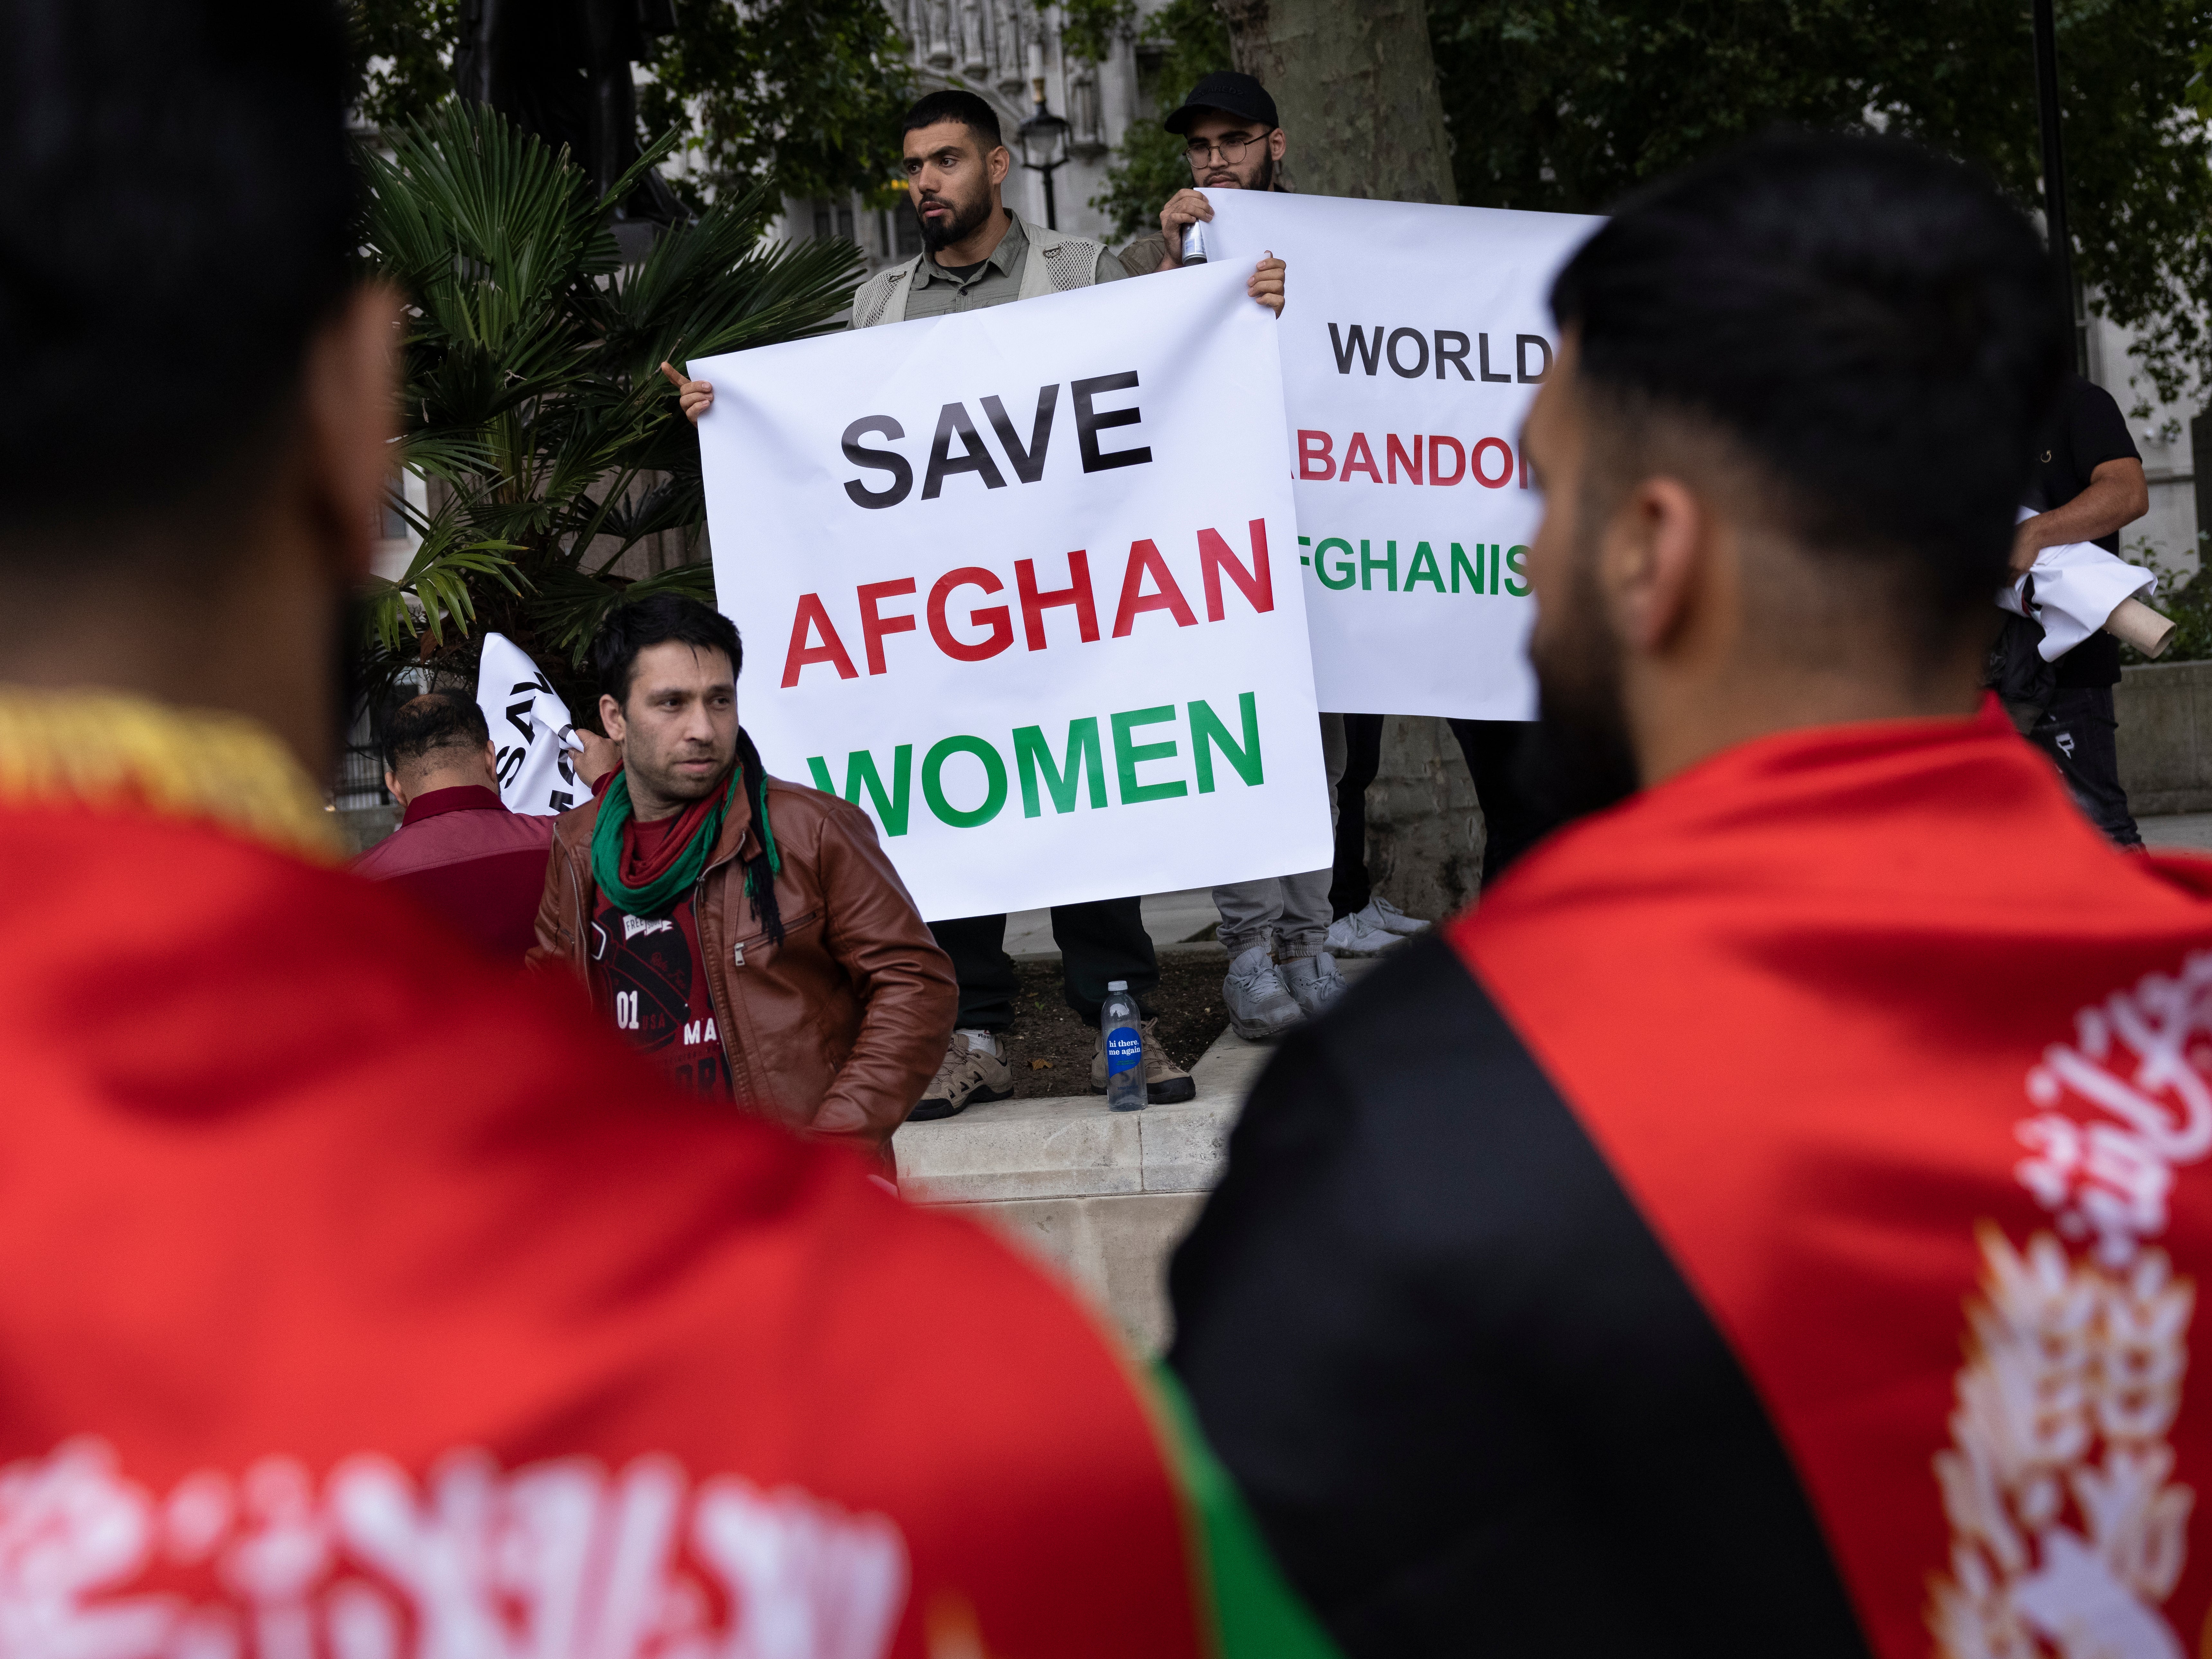 Focusing on the plight of Afghan women risks obscuring other iniquities